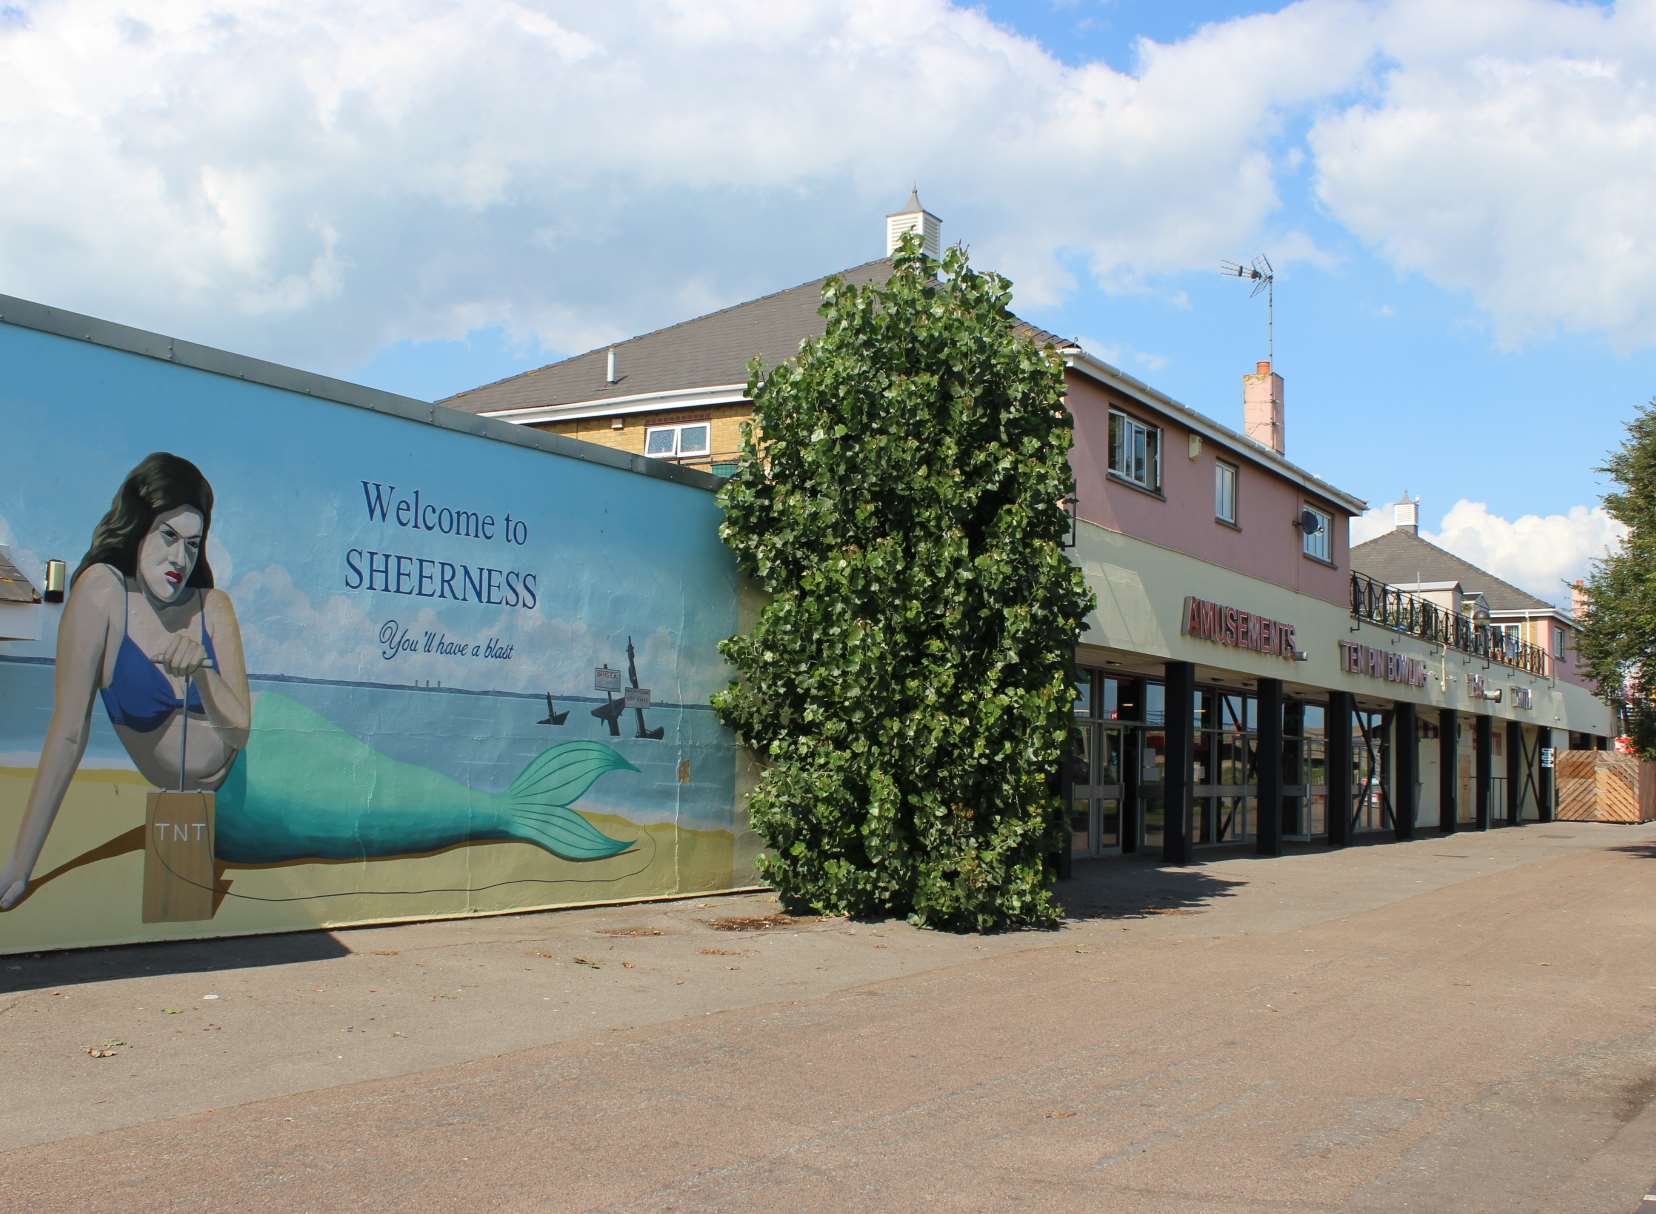 Sheerness: Amusement arcade with mural depicting the Richard Montgomery bomb ship.